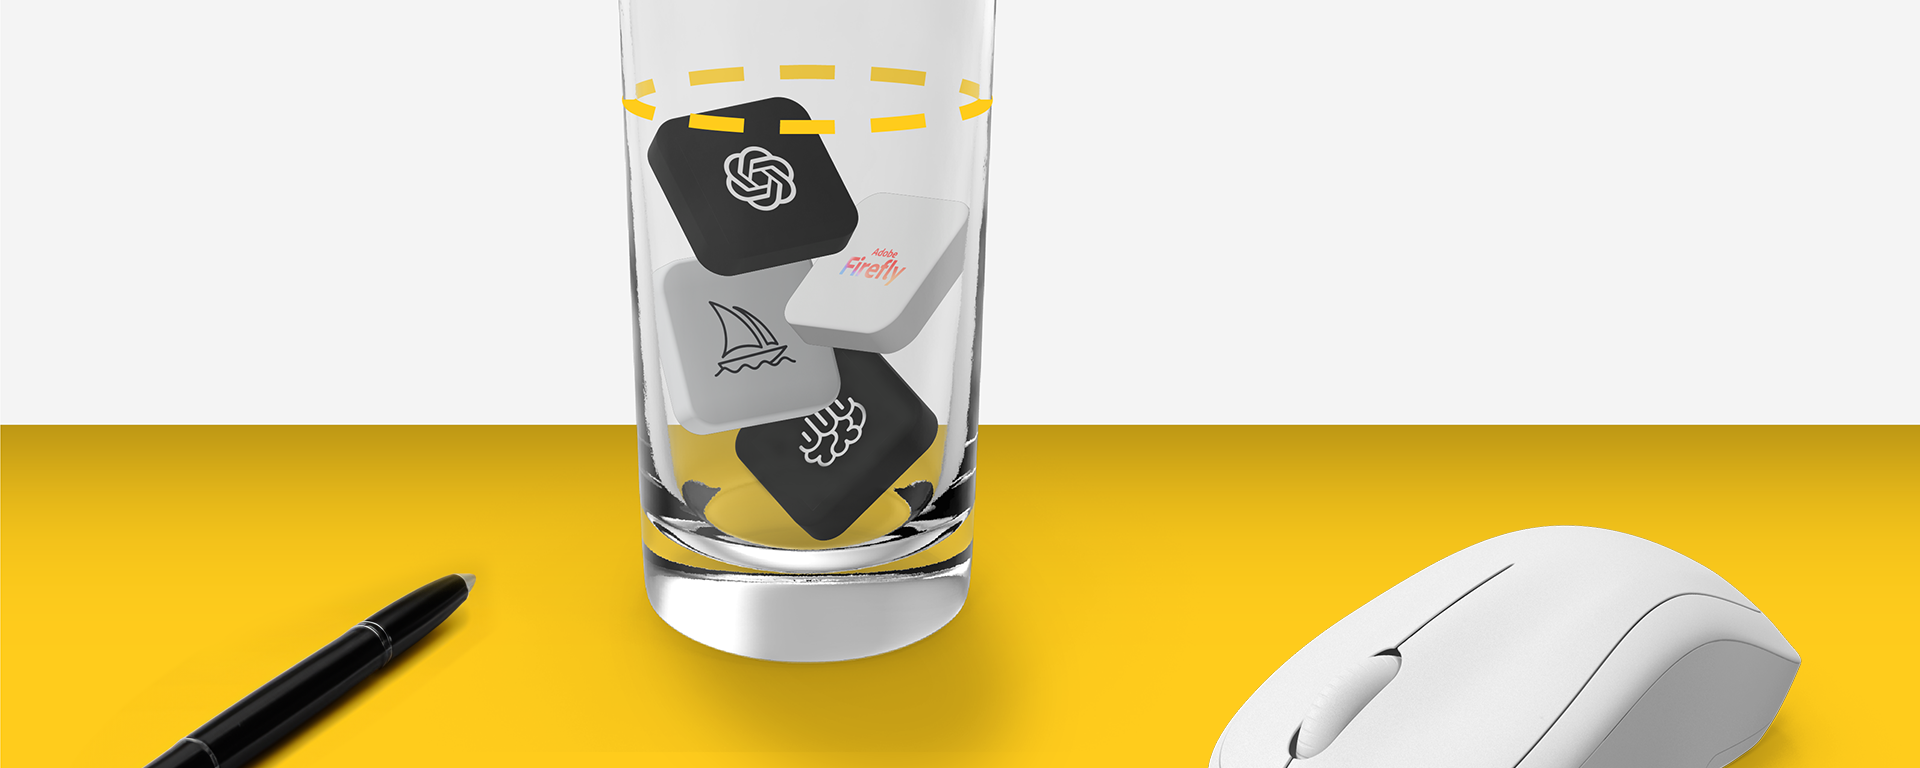 A clear glass containing various icons associated with digital design, including a pen tool and logo design, placed on a yellow surface next to a white computer mouse and a black pen.